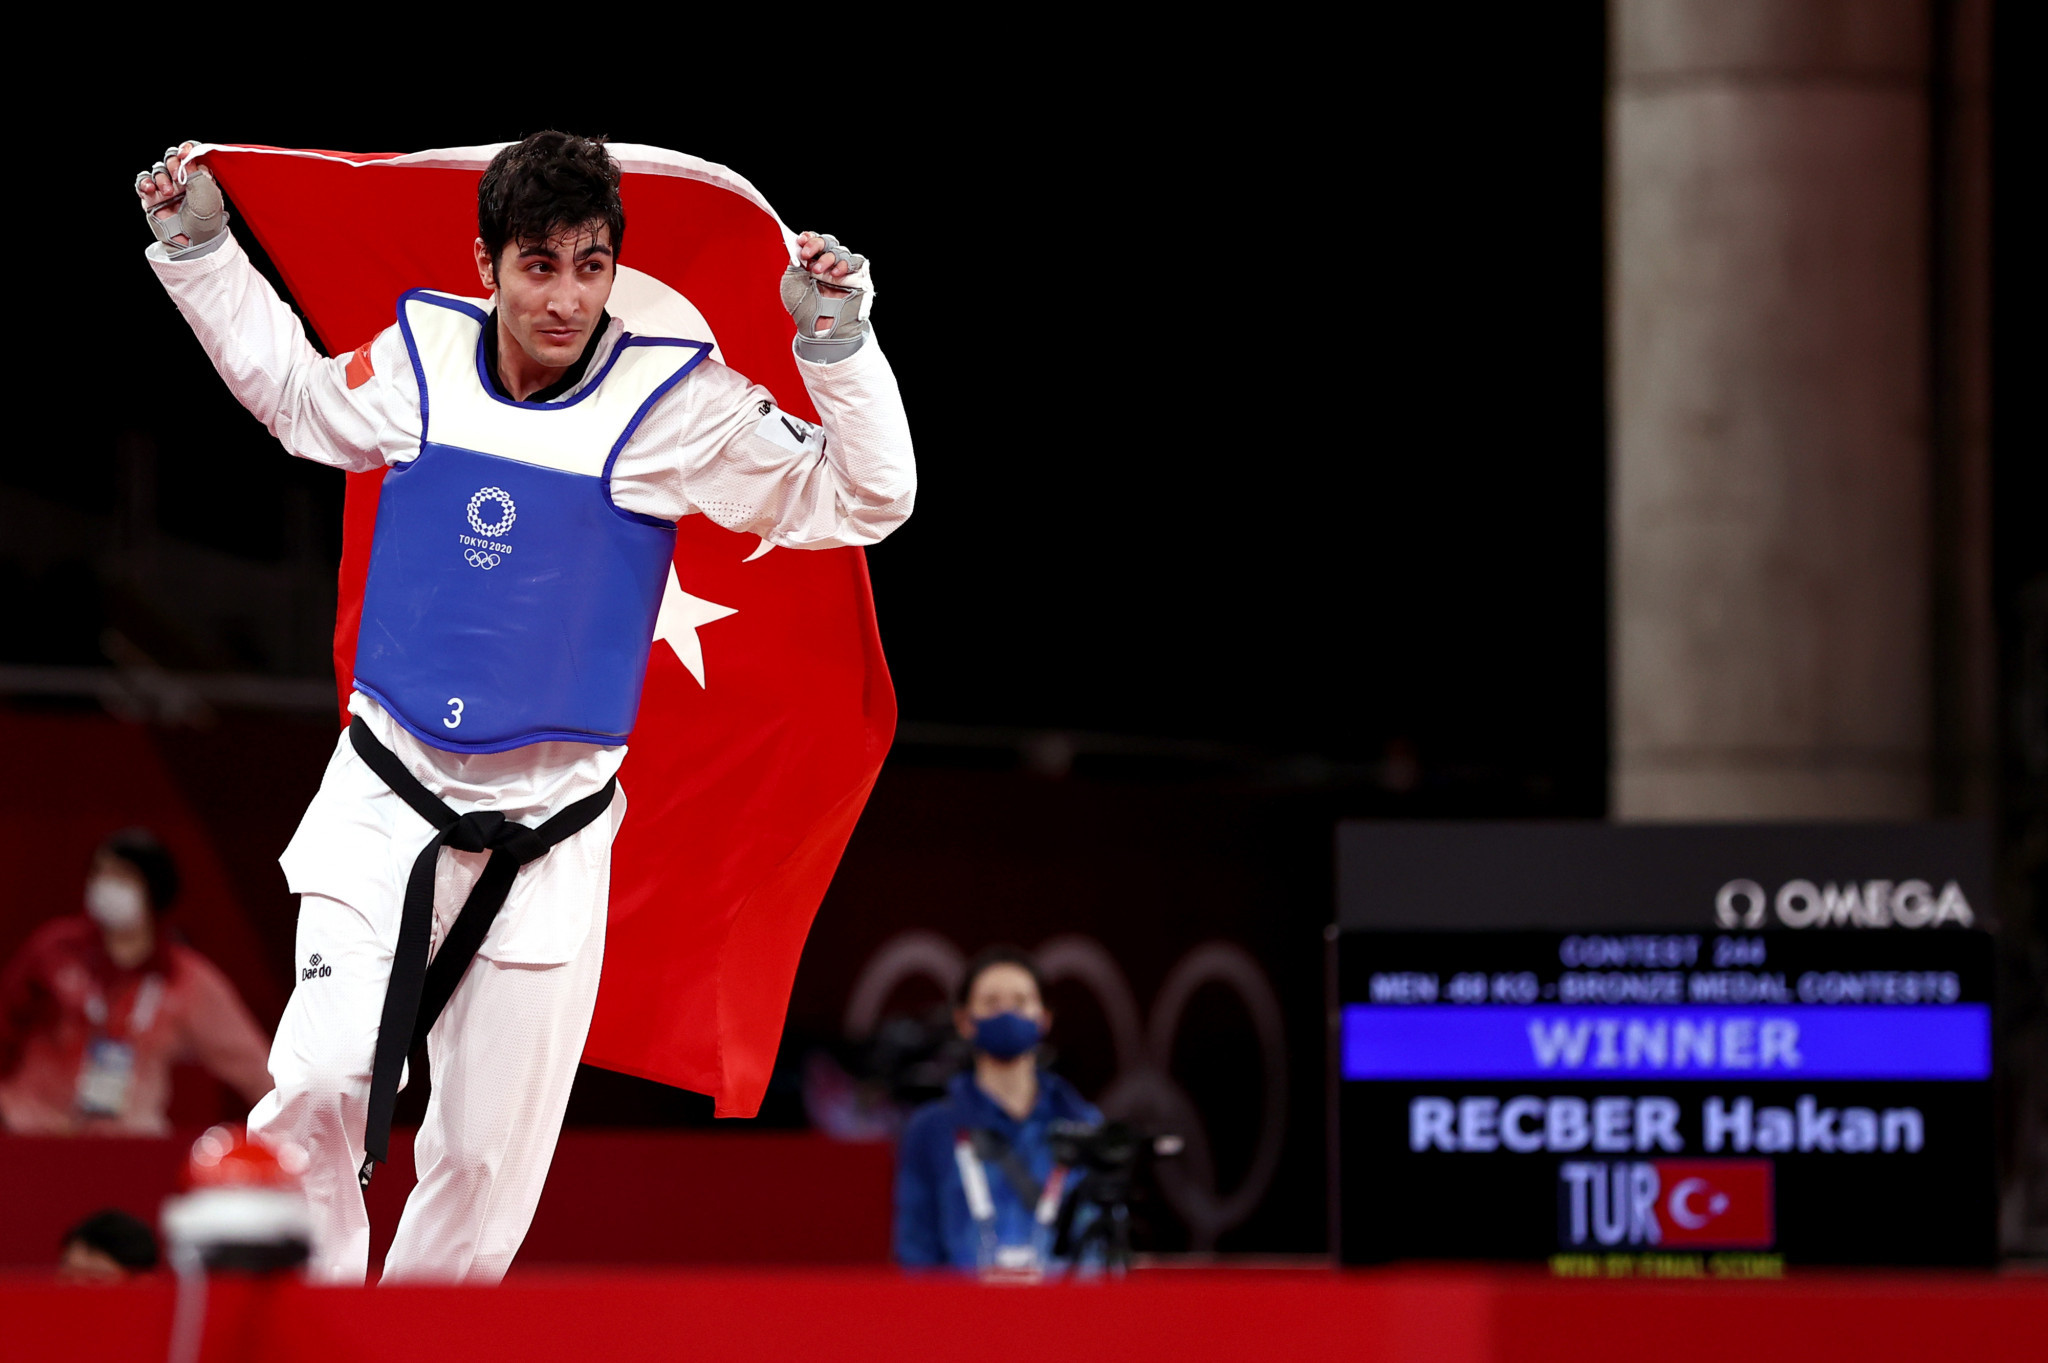 Hakan Reçber was one of two bronze medallists in taekwondo for Turkey at Tokyo 2020 ©Getty Images